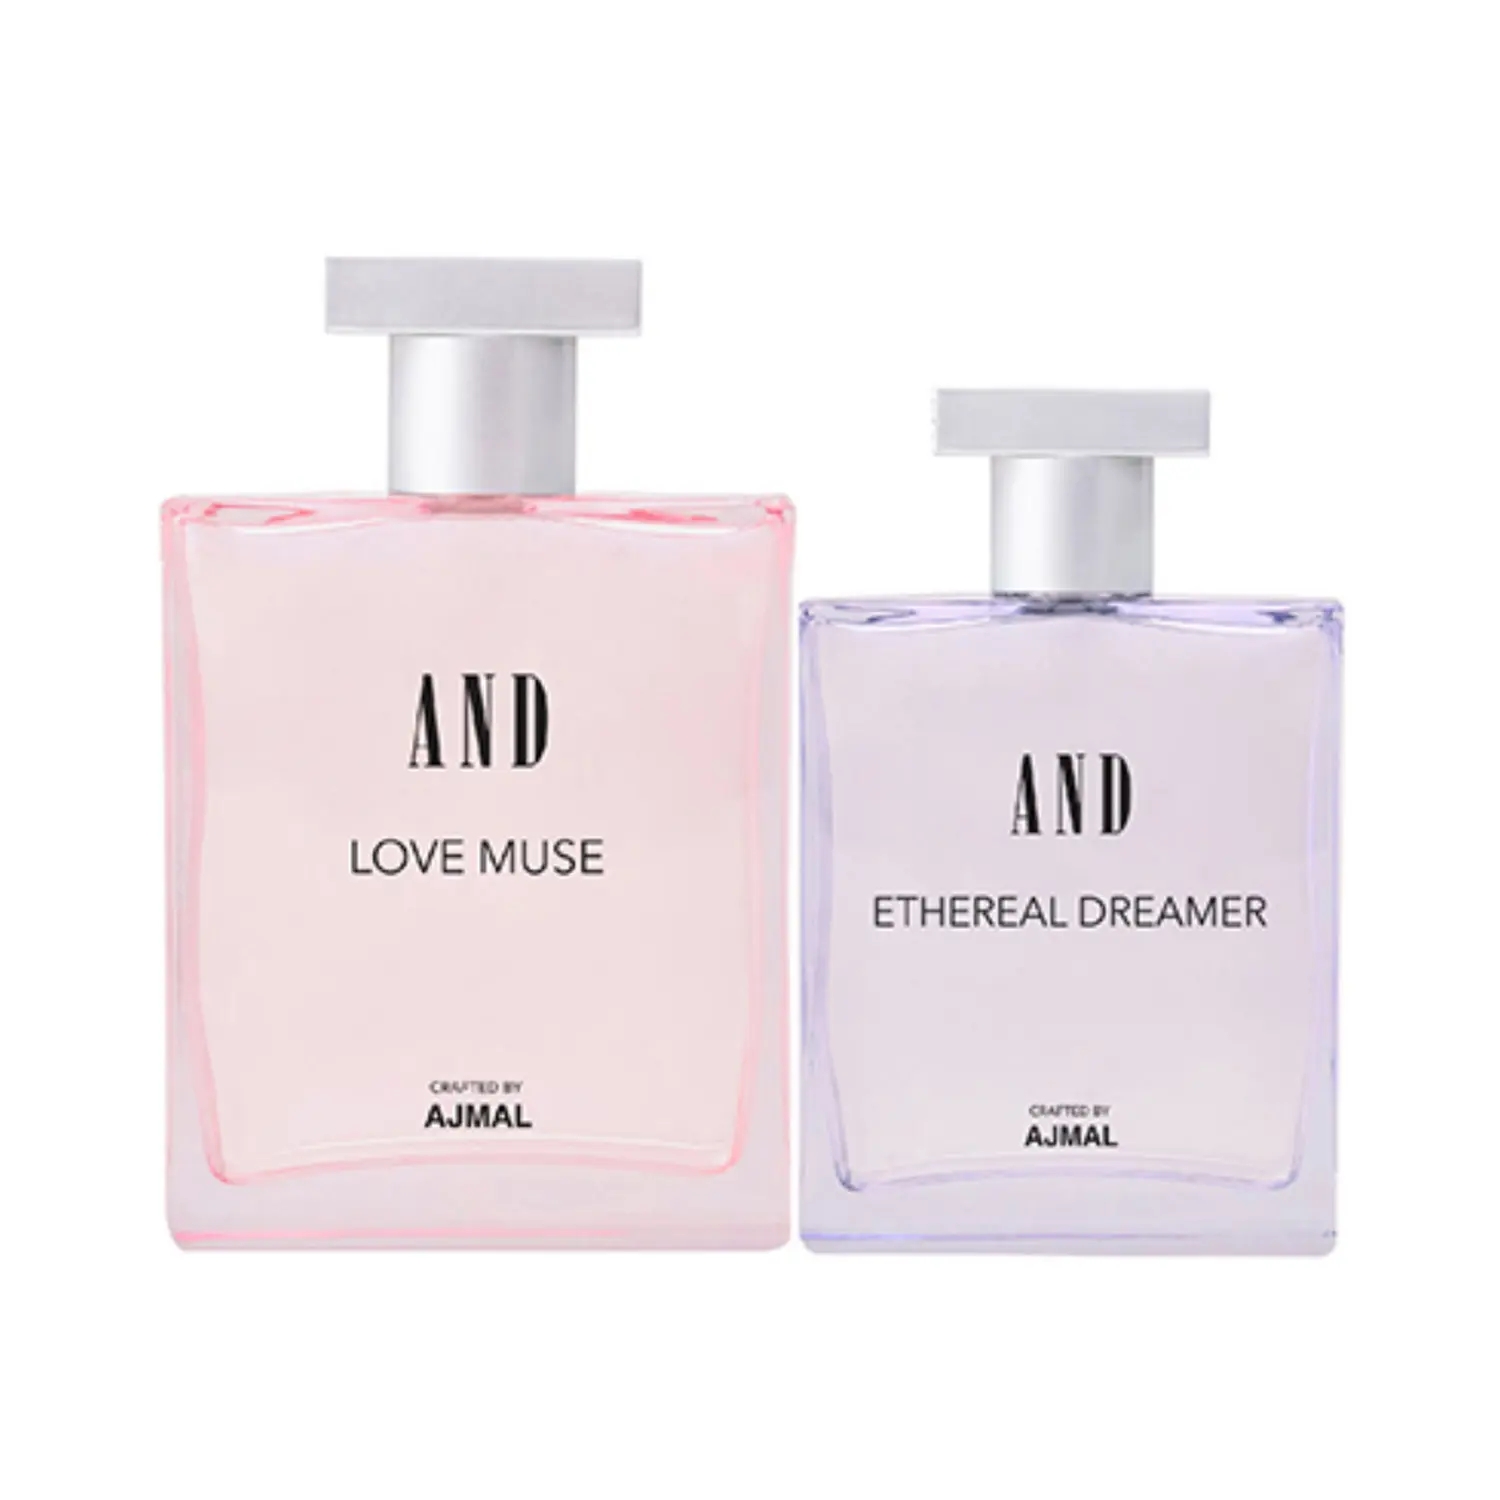 AND | AND Love Muse EDP & Ethereal Dreamer EDP - (2Pcs)